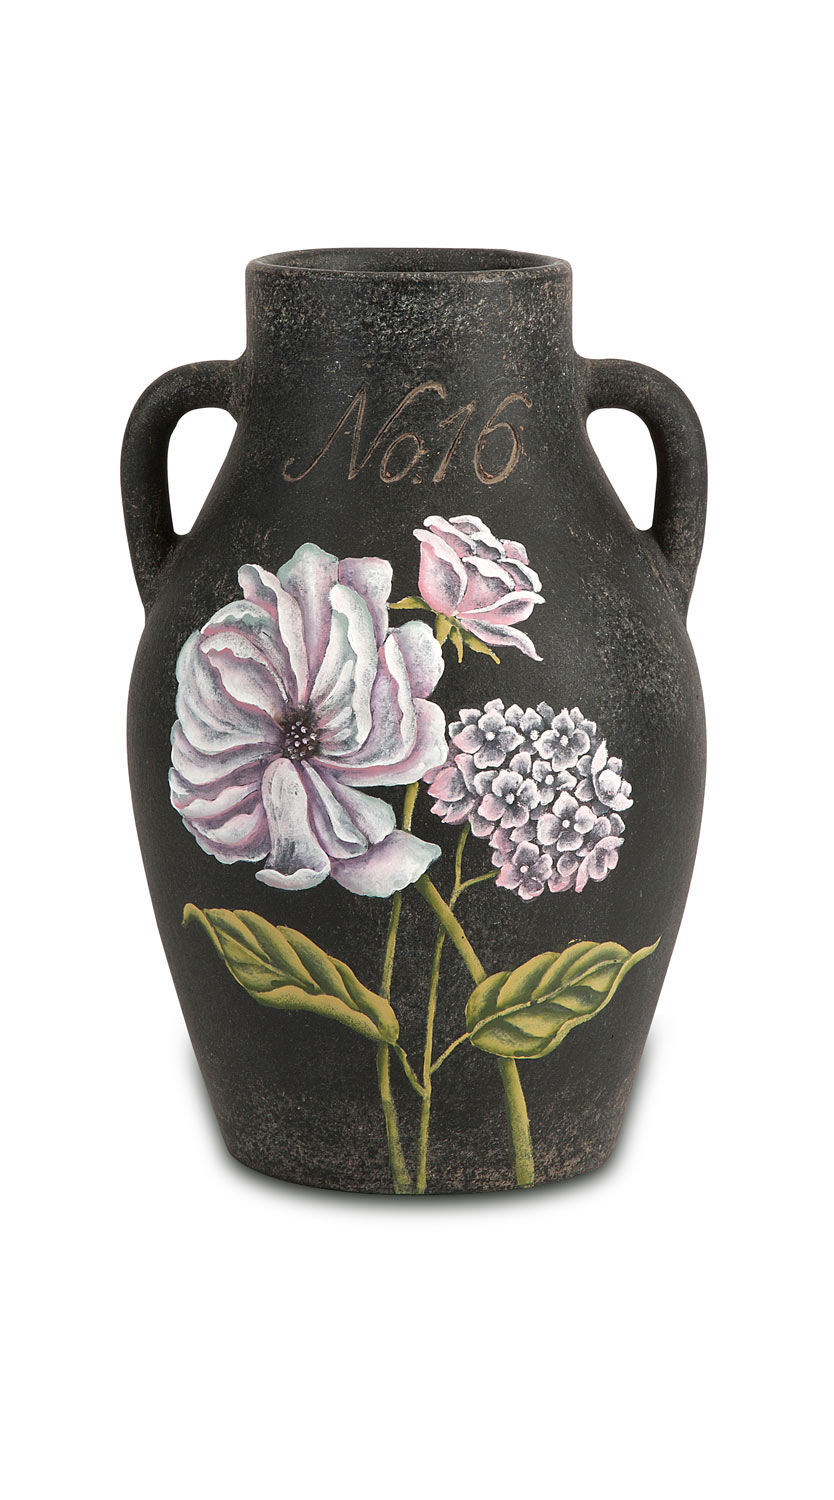 IMAX Quinn Small Handpainted Floral Vase